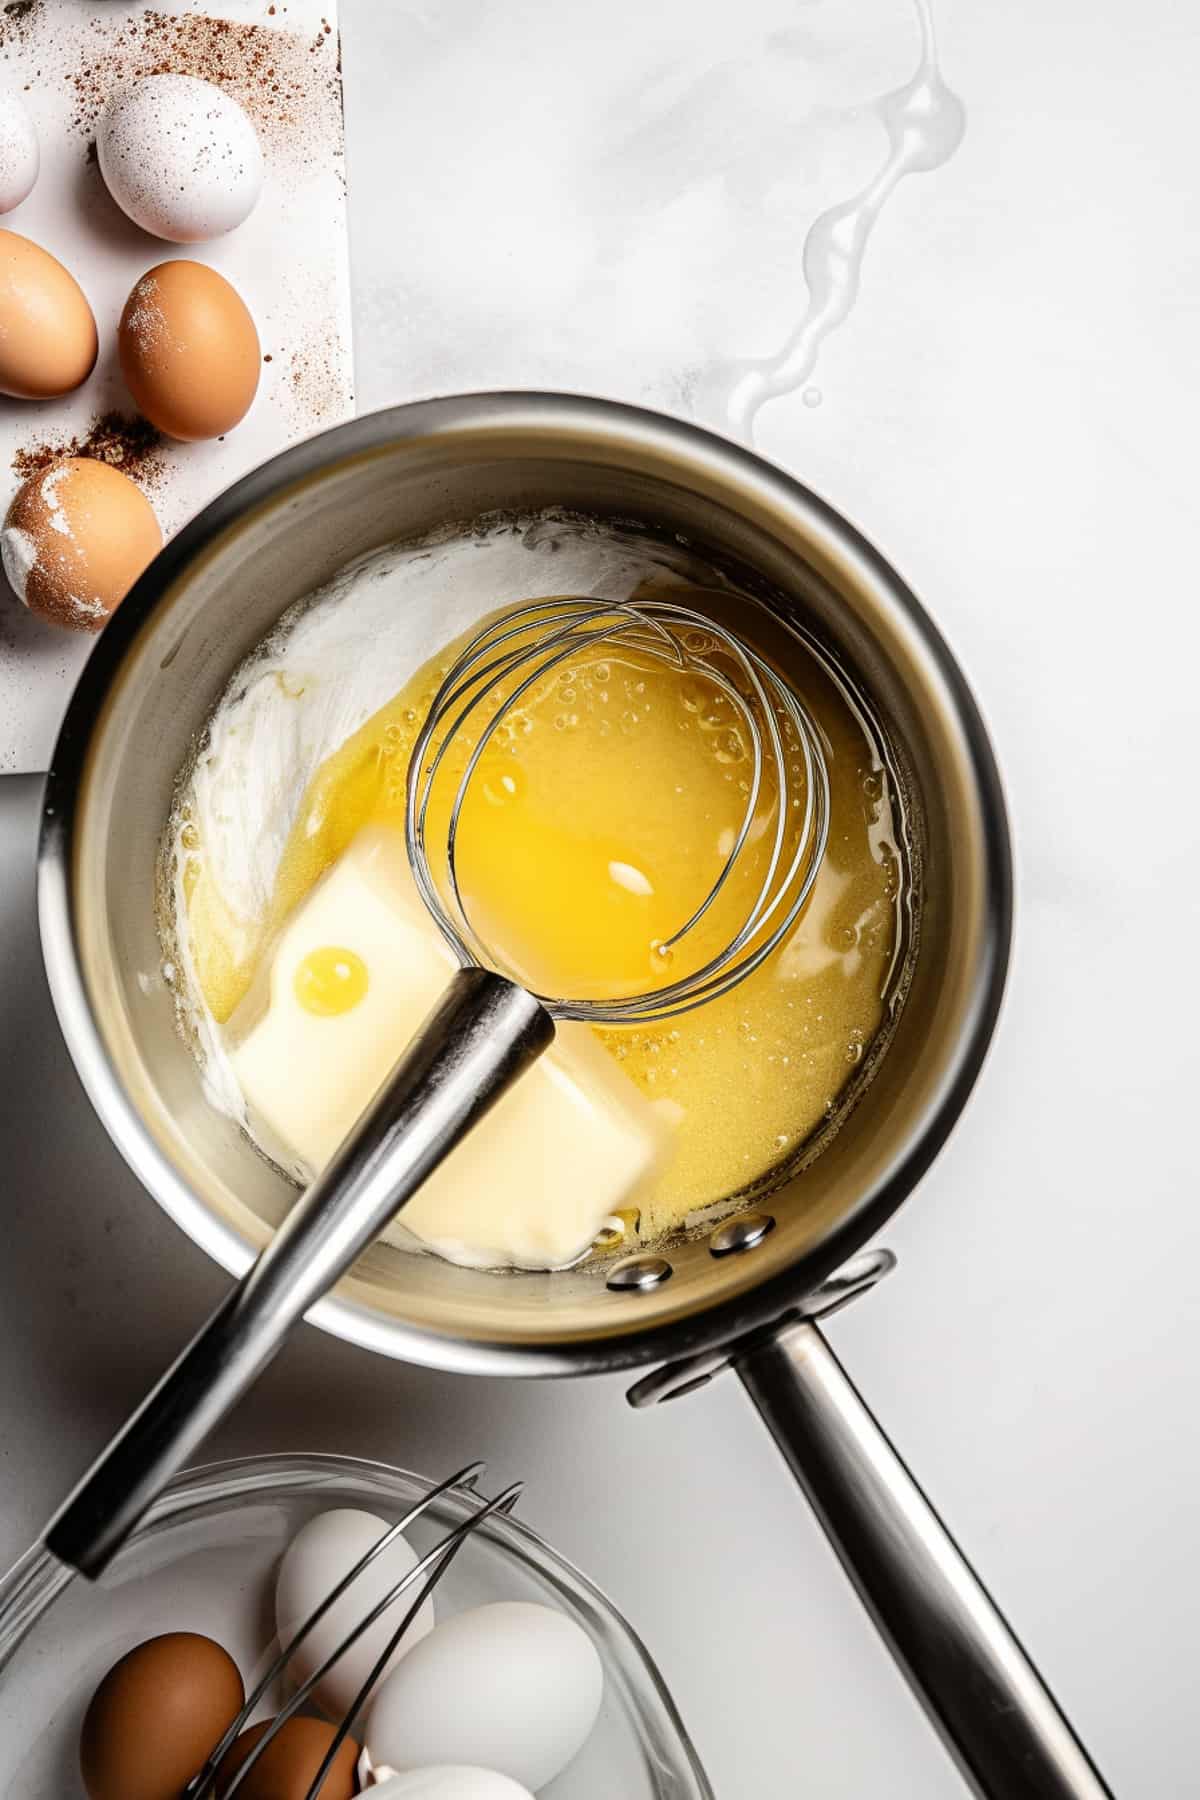 Butter and eggs being whisked in a sauce pan.